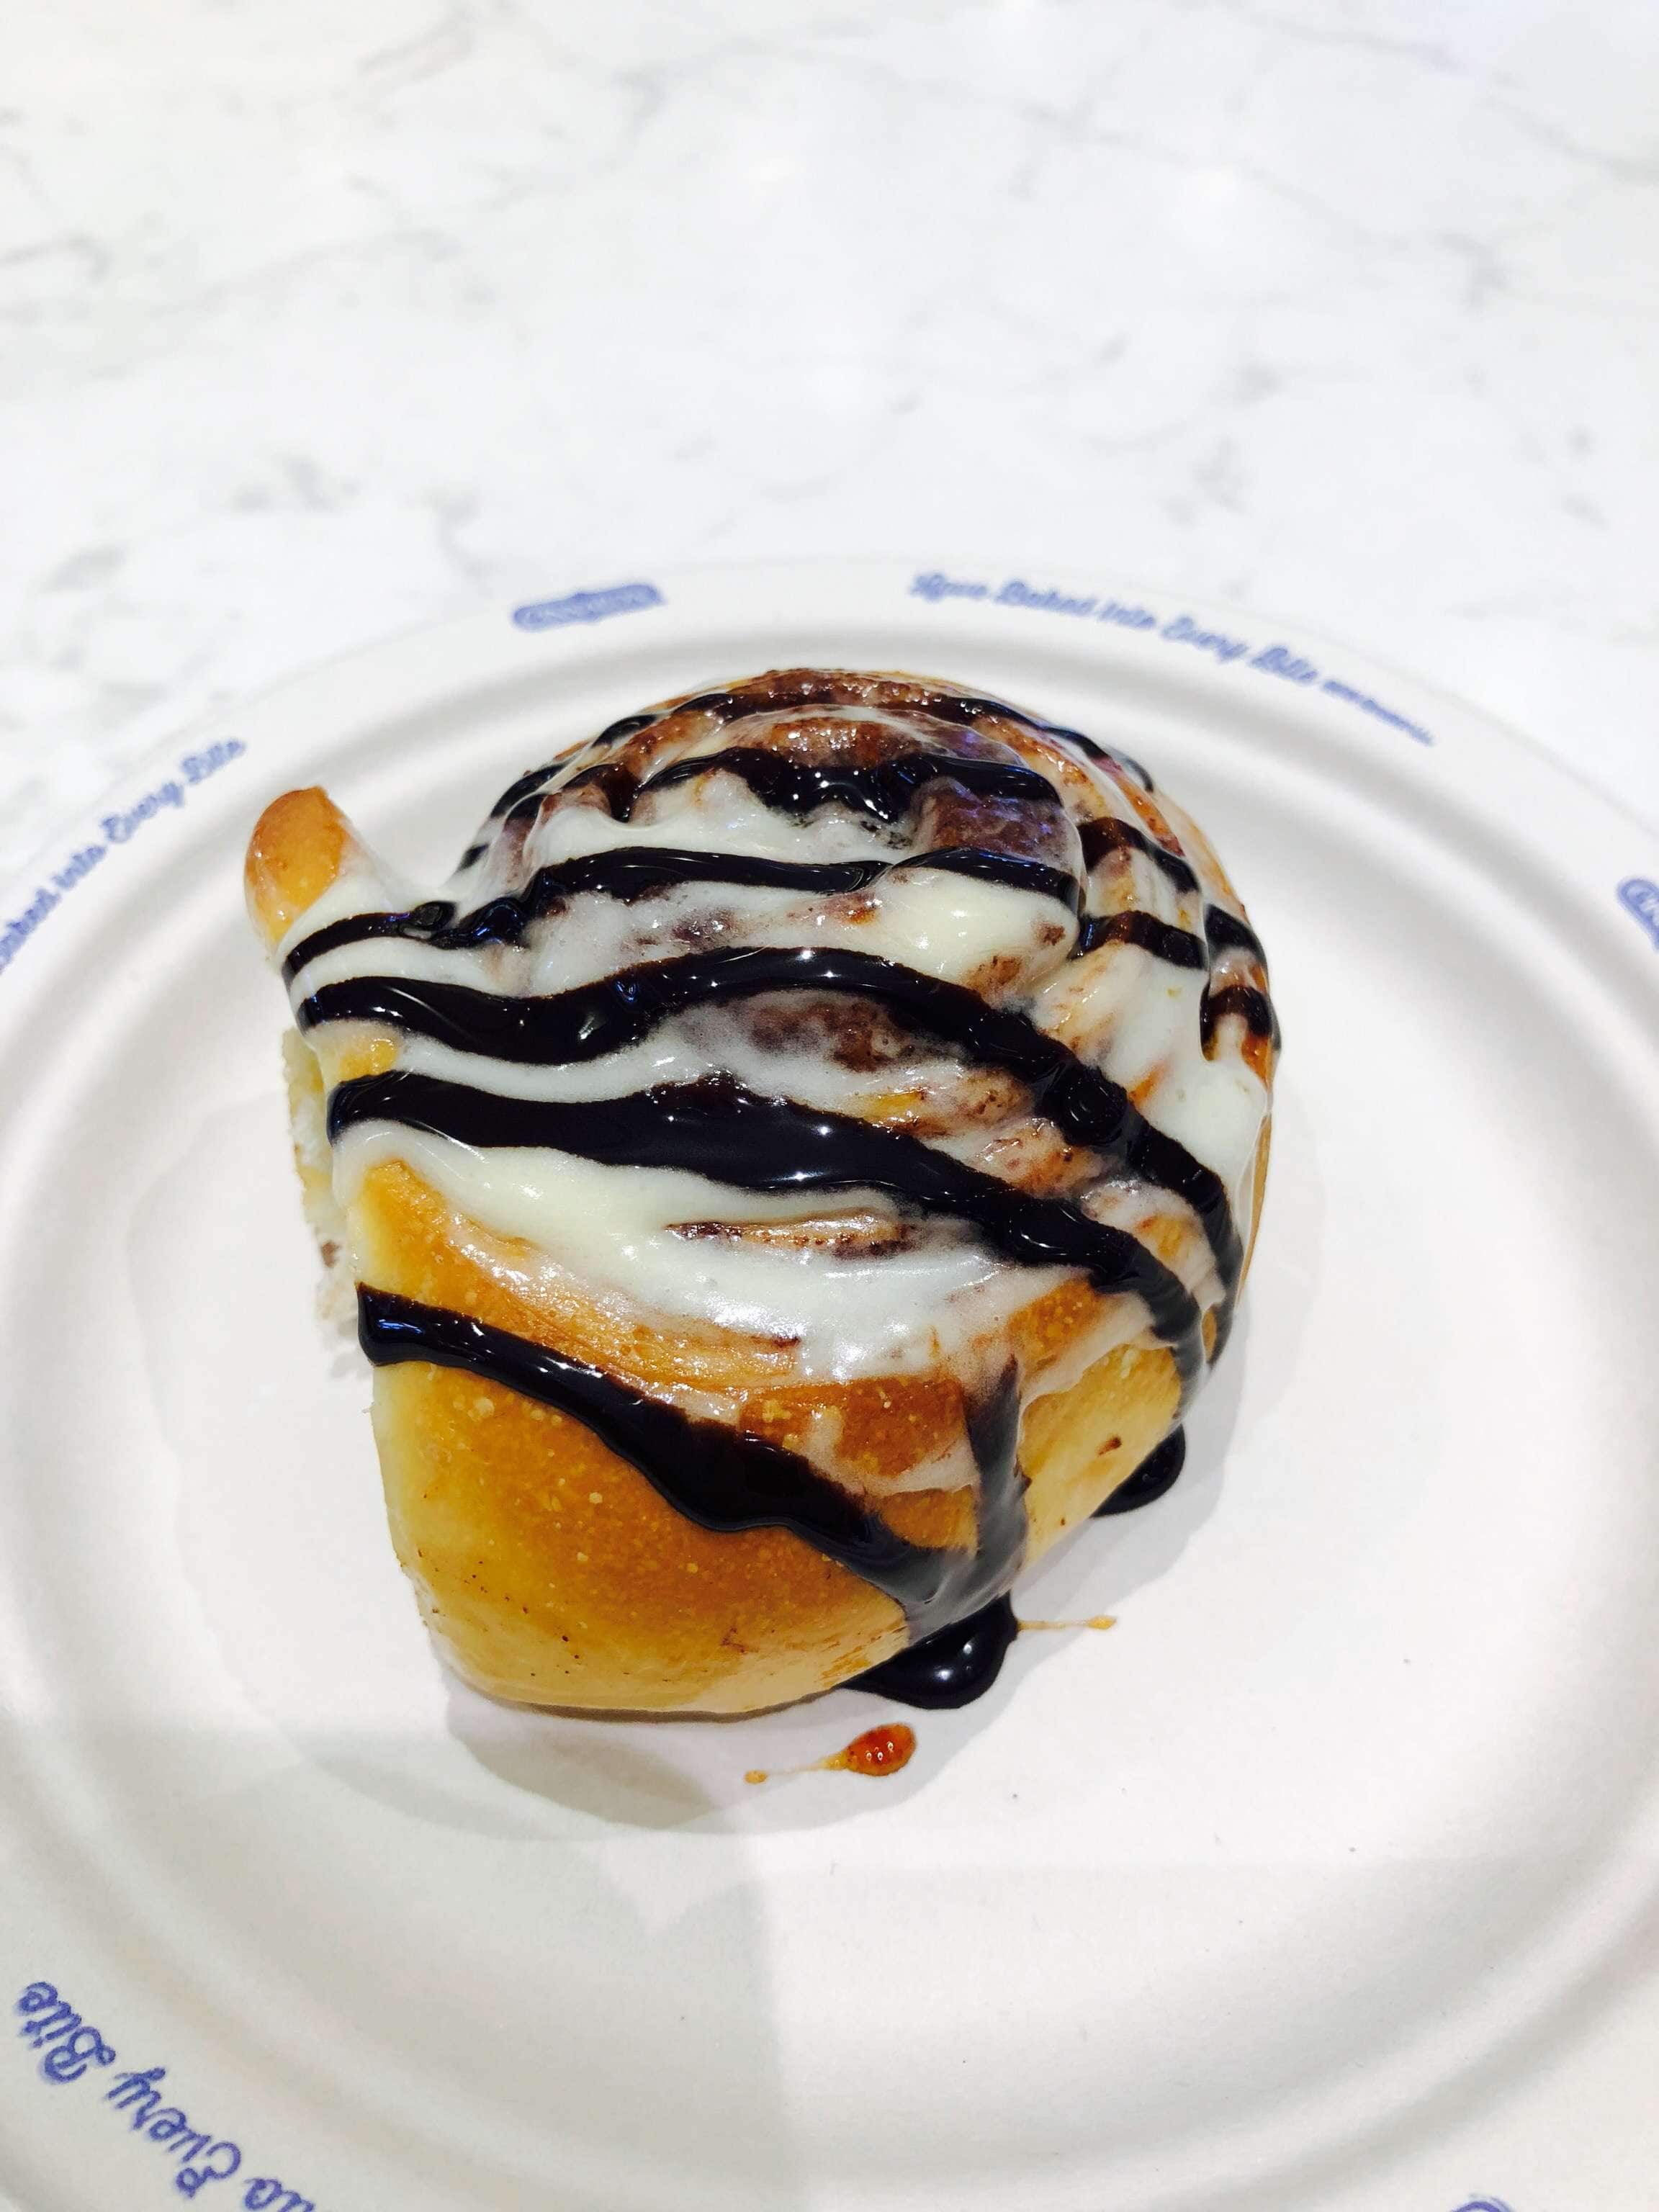 Chocobon!!! Out of this world - Review of Cinnabon, Dubai